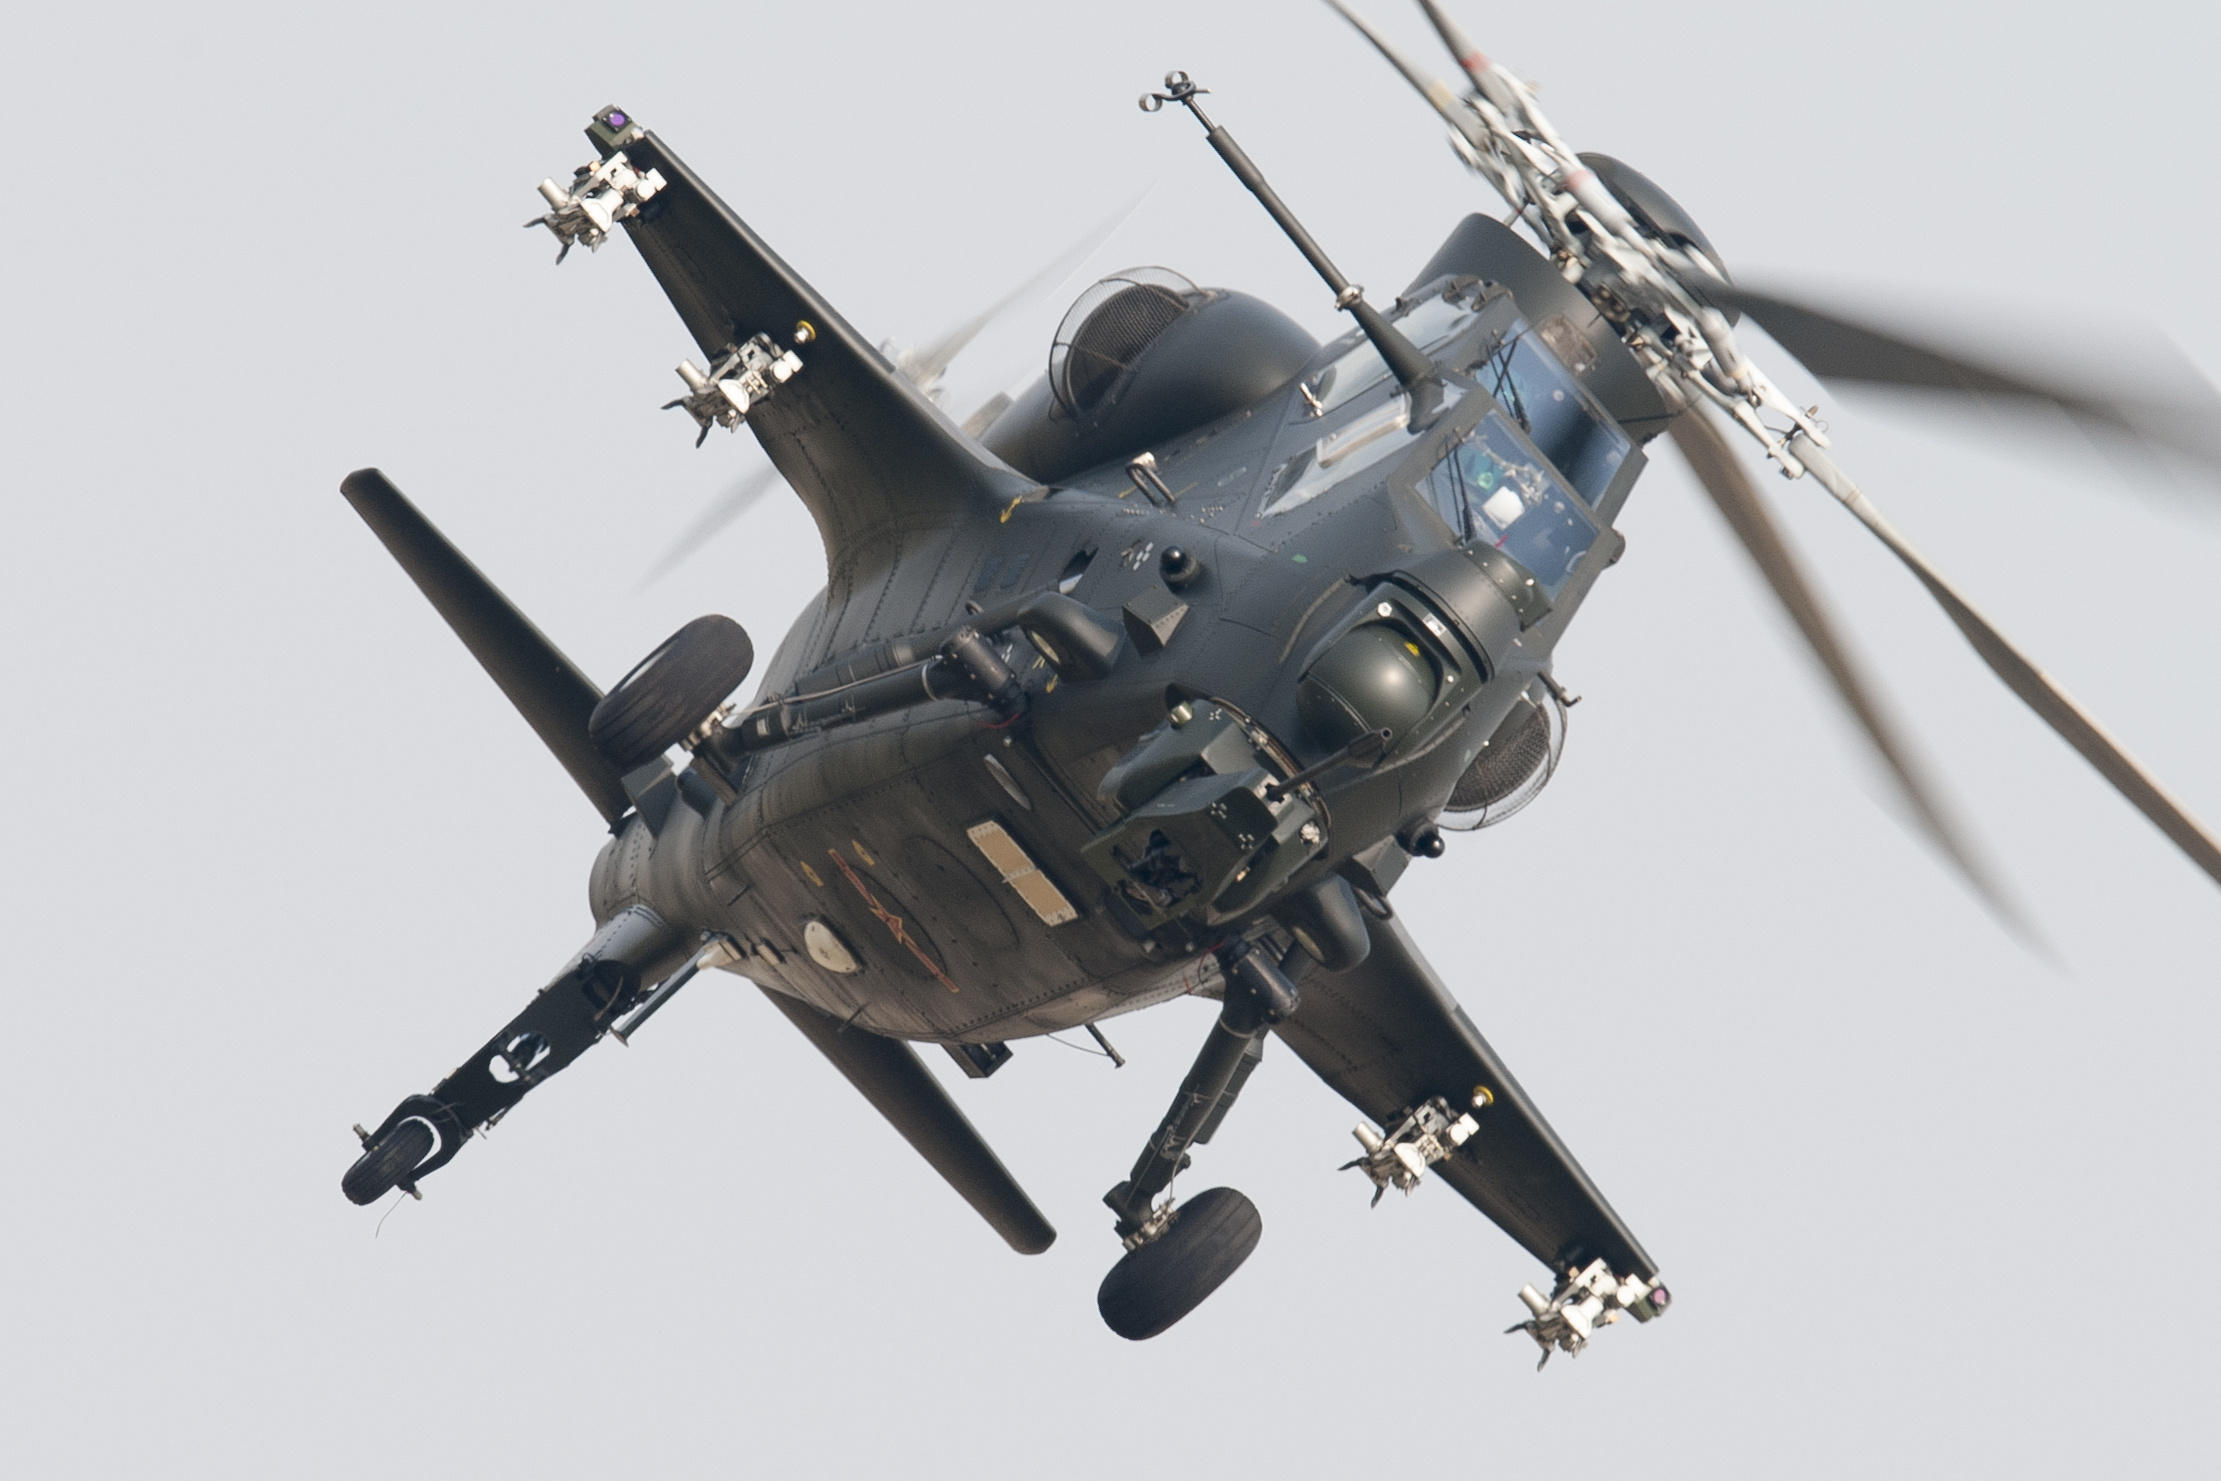 CAIC WZ-10, WZ-10jpg, Attack helicopter, China Air Force, 2230x1490 HD Desktop